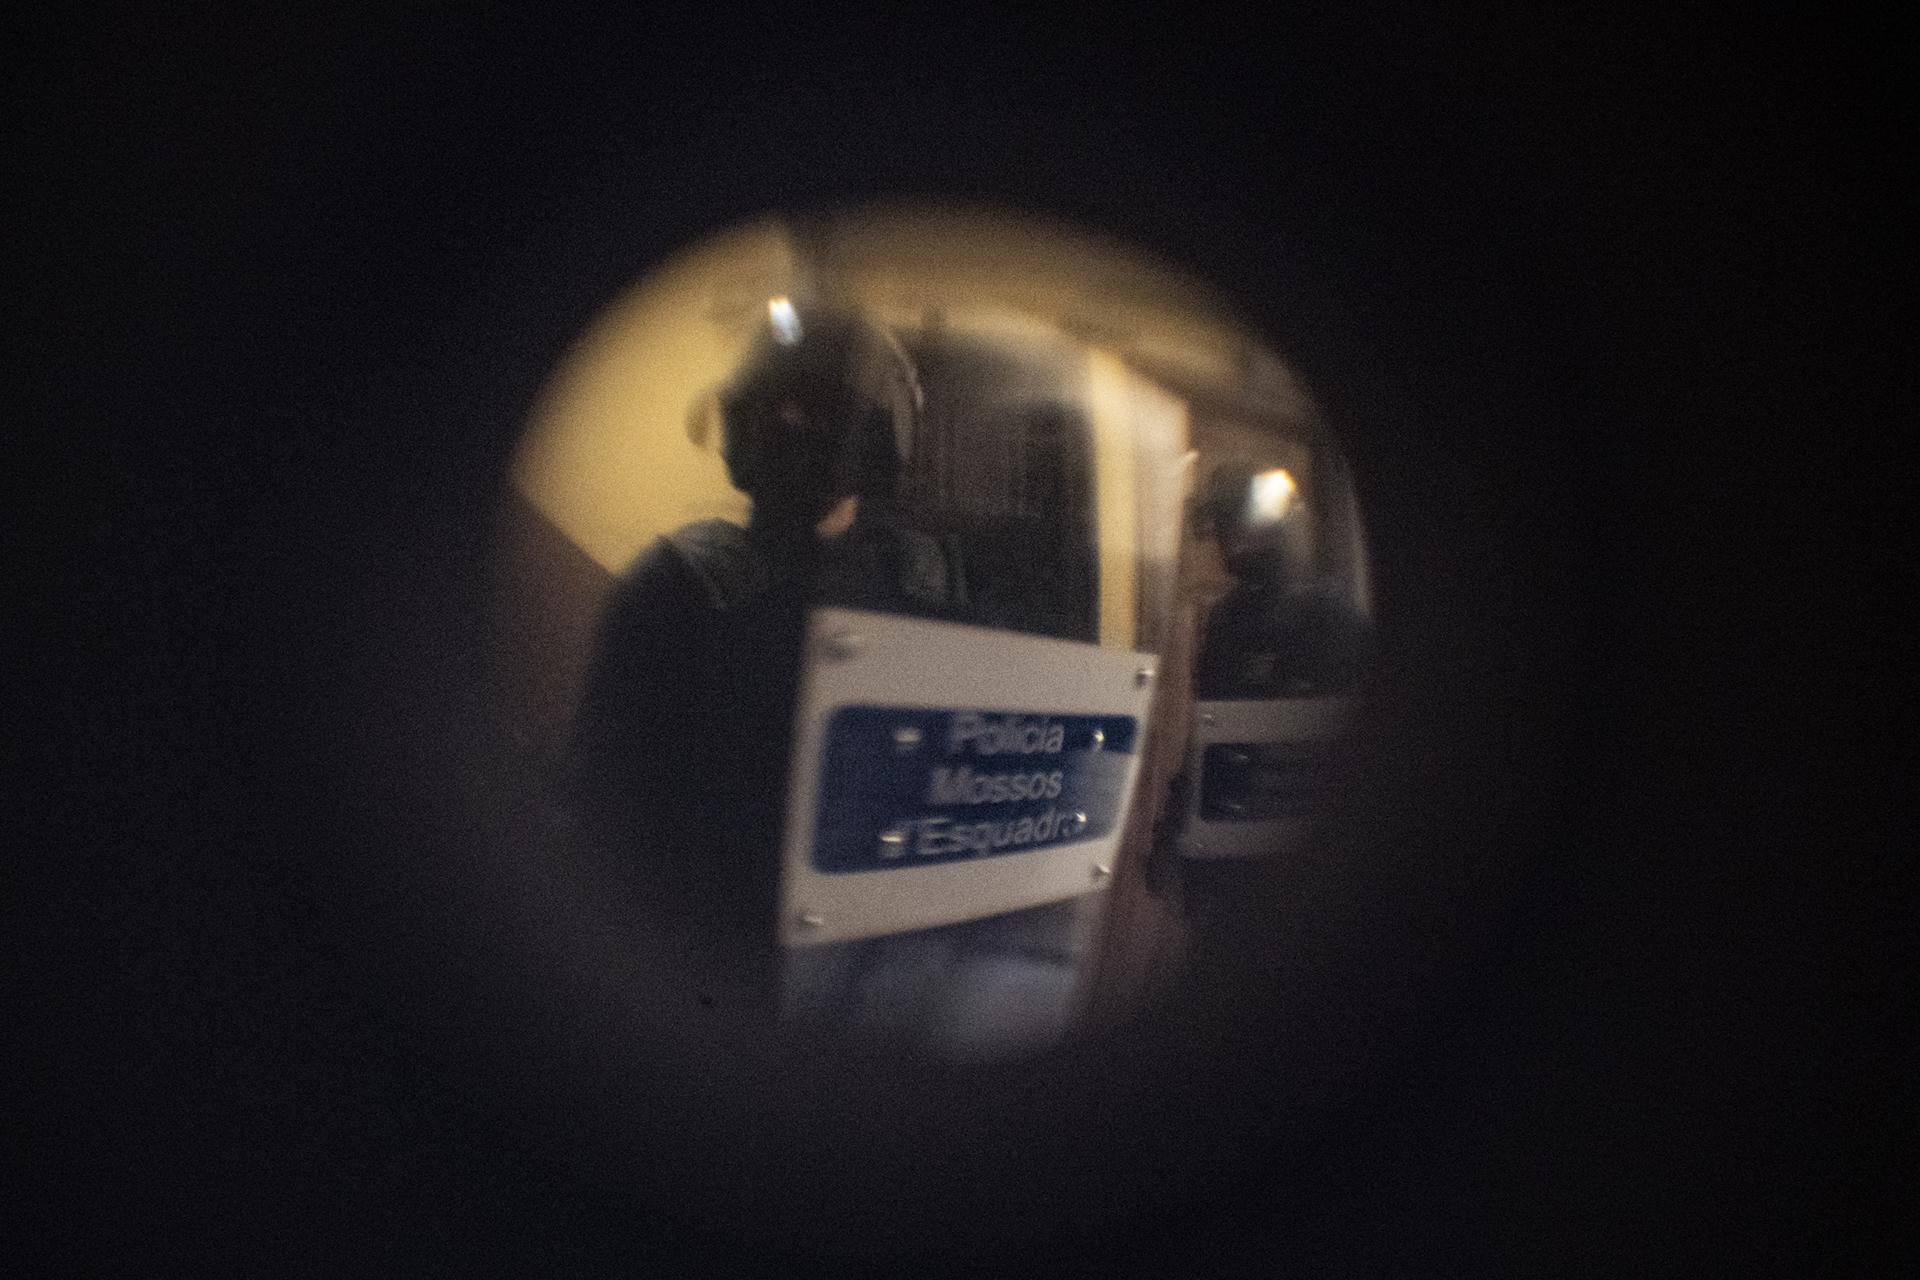 Barcelona Housing Crisis (ongoing) -  Police officers, seen through the door’s spyhole,...